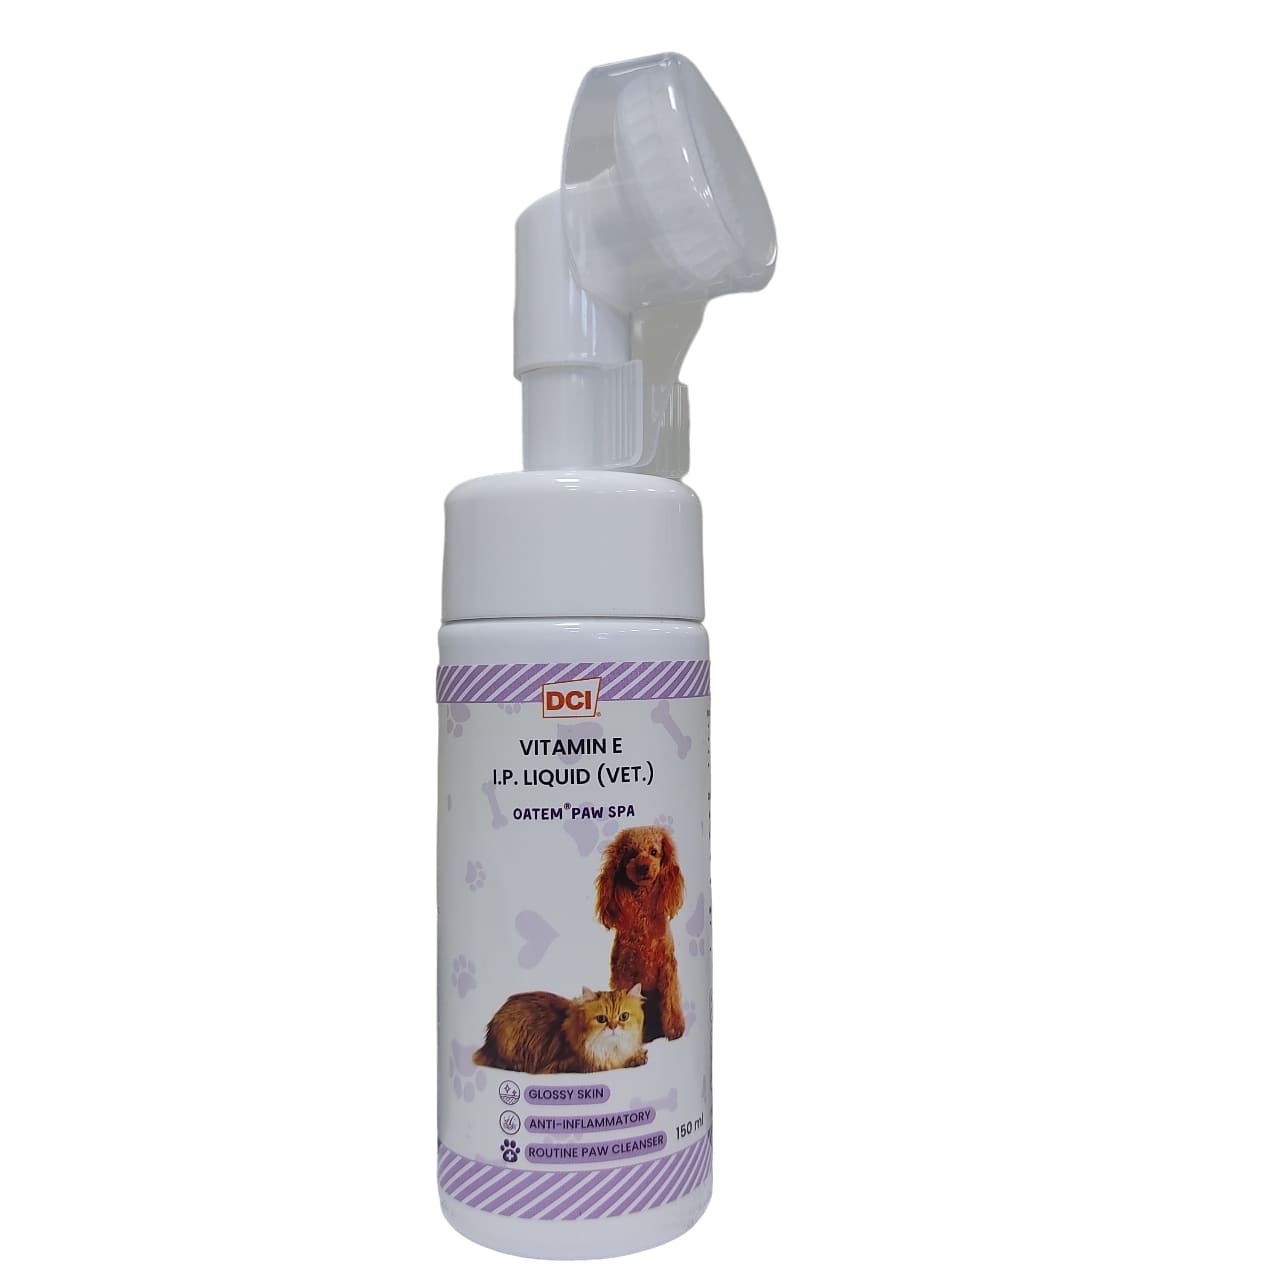 Oatem Paw SPA, Paw Cleaner for Dogs and Cats, 150 ml